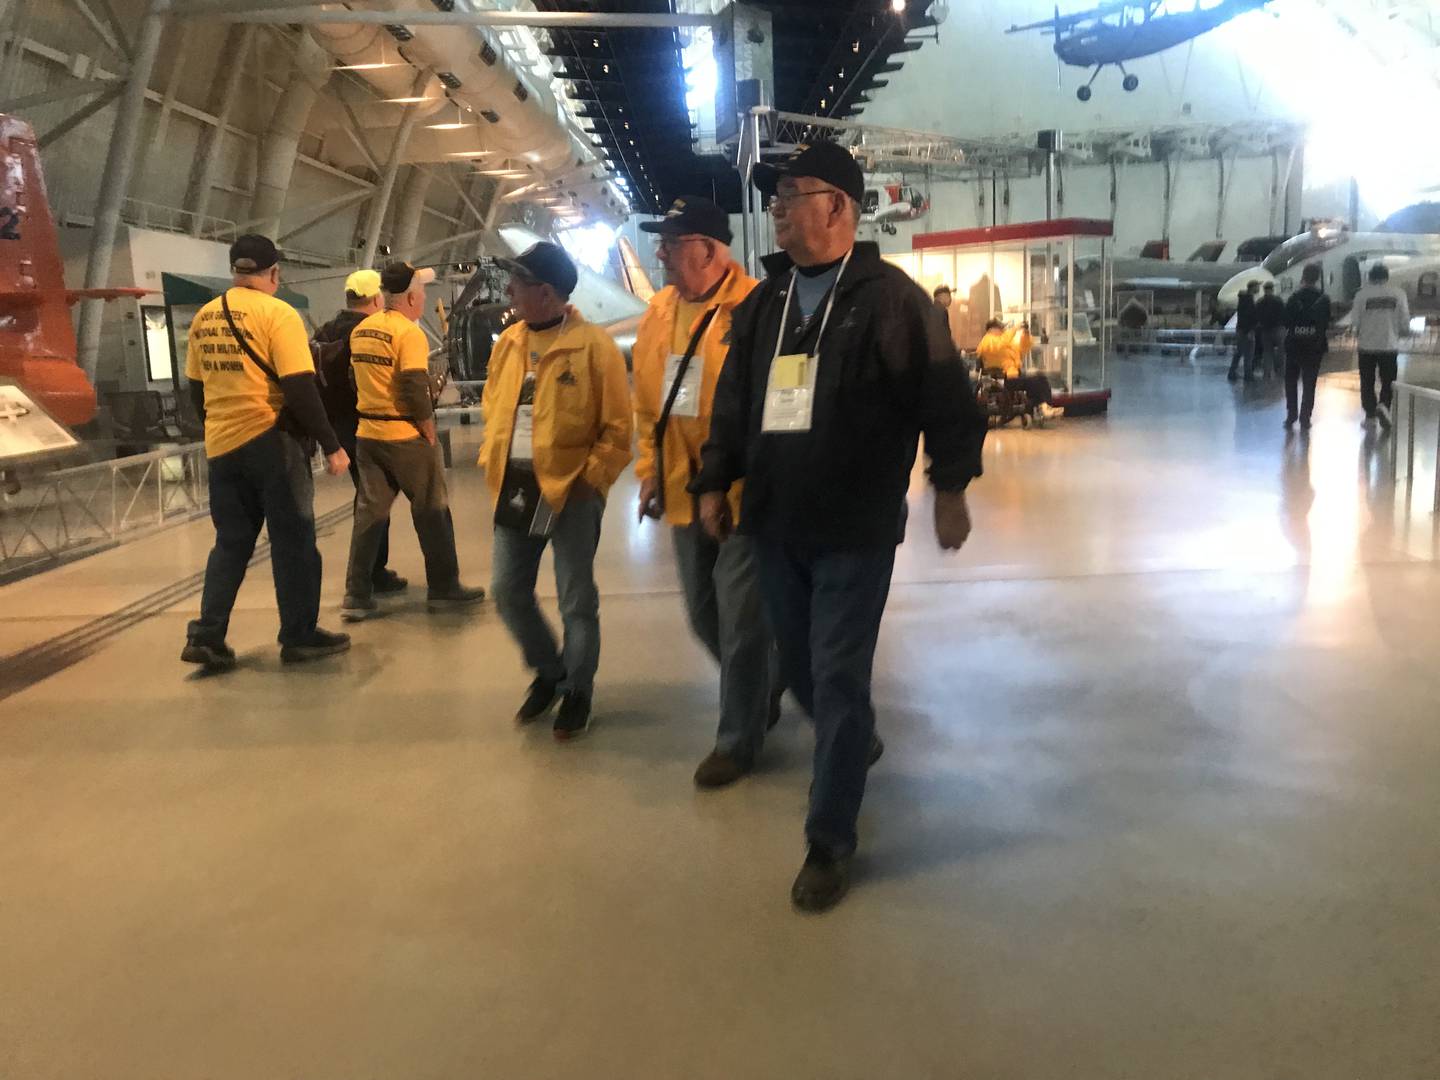 Veterans from Whiteside County who went on an Honor Flight on Election Day tour the Smithsonian's National Air and Space Museum in Washington, D.C.